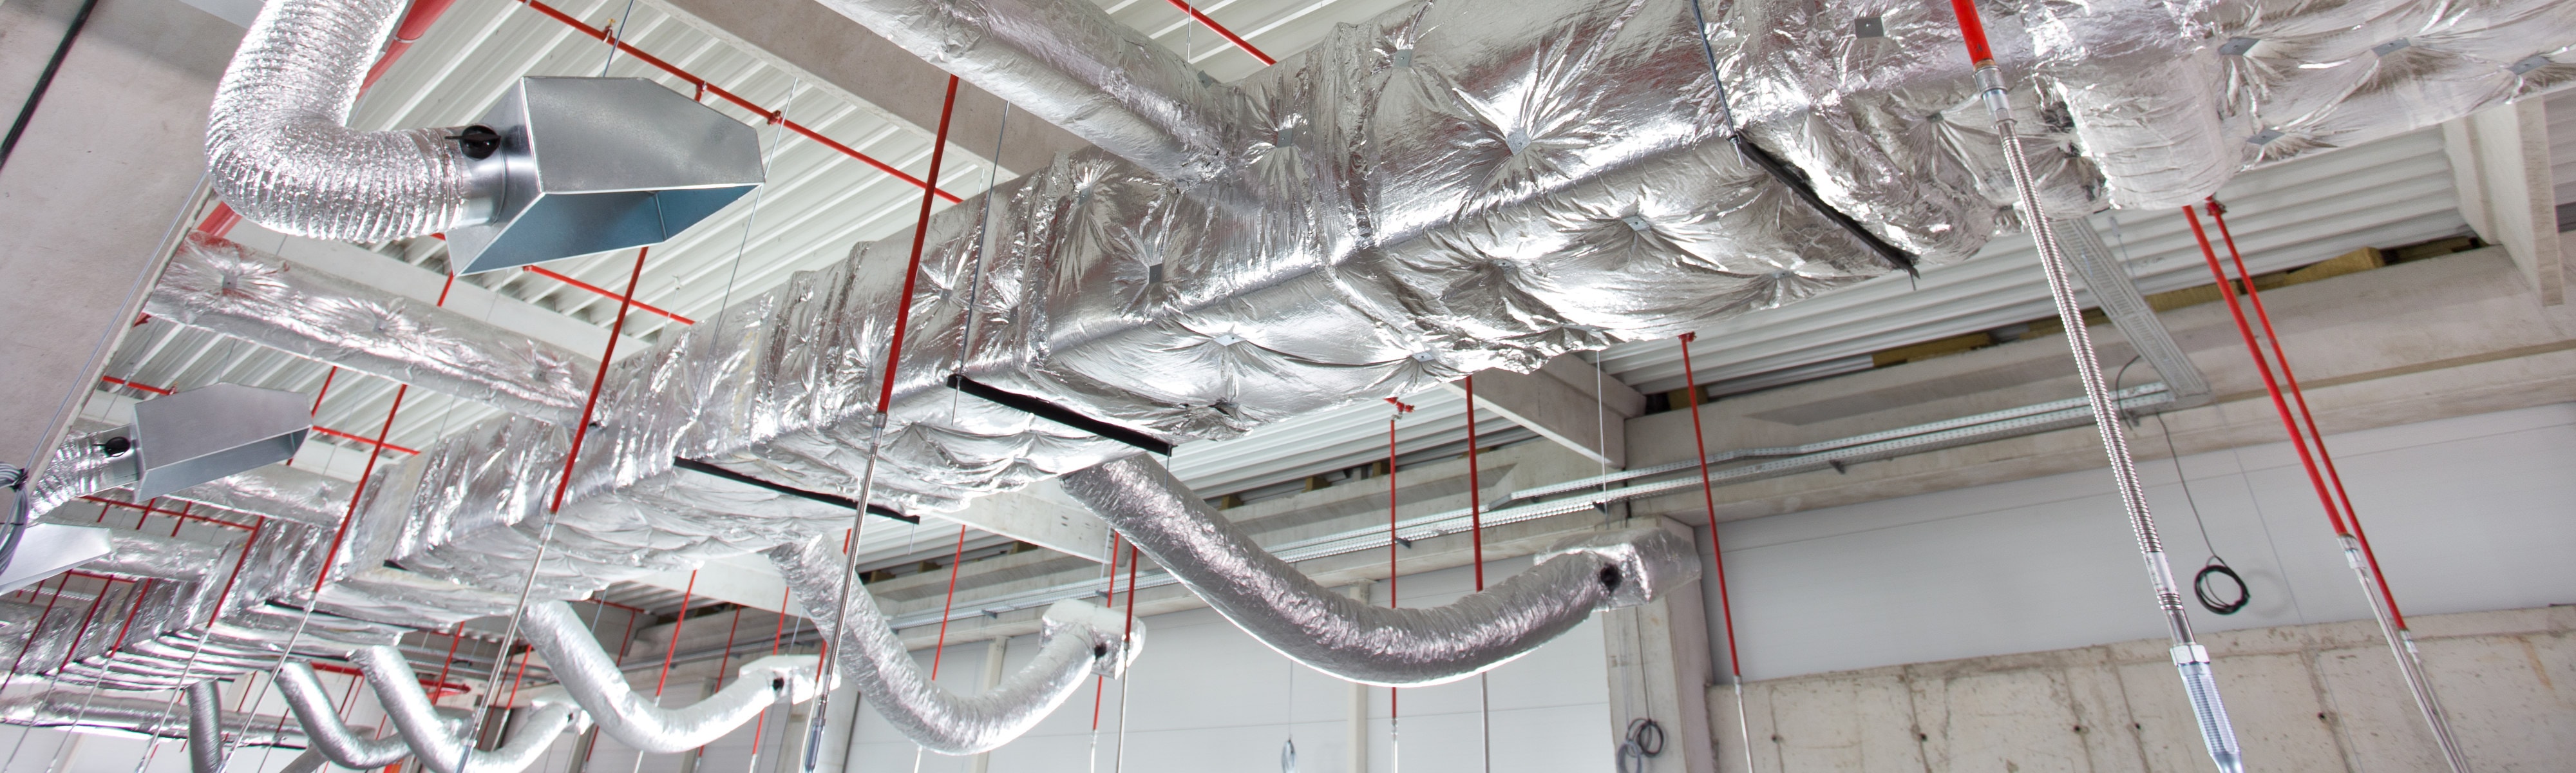 Silver air ducts.